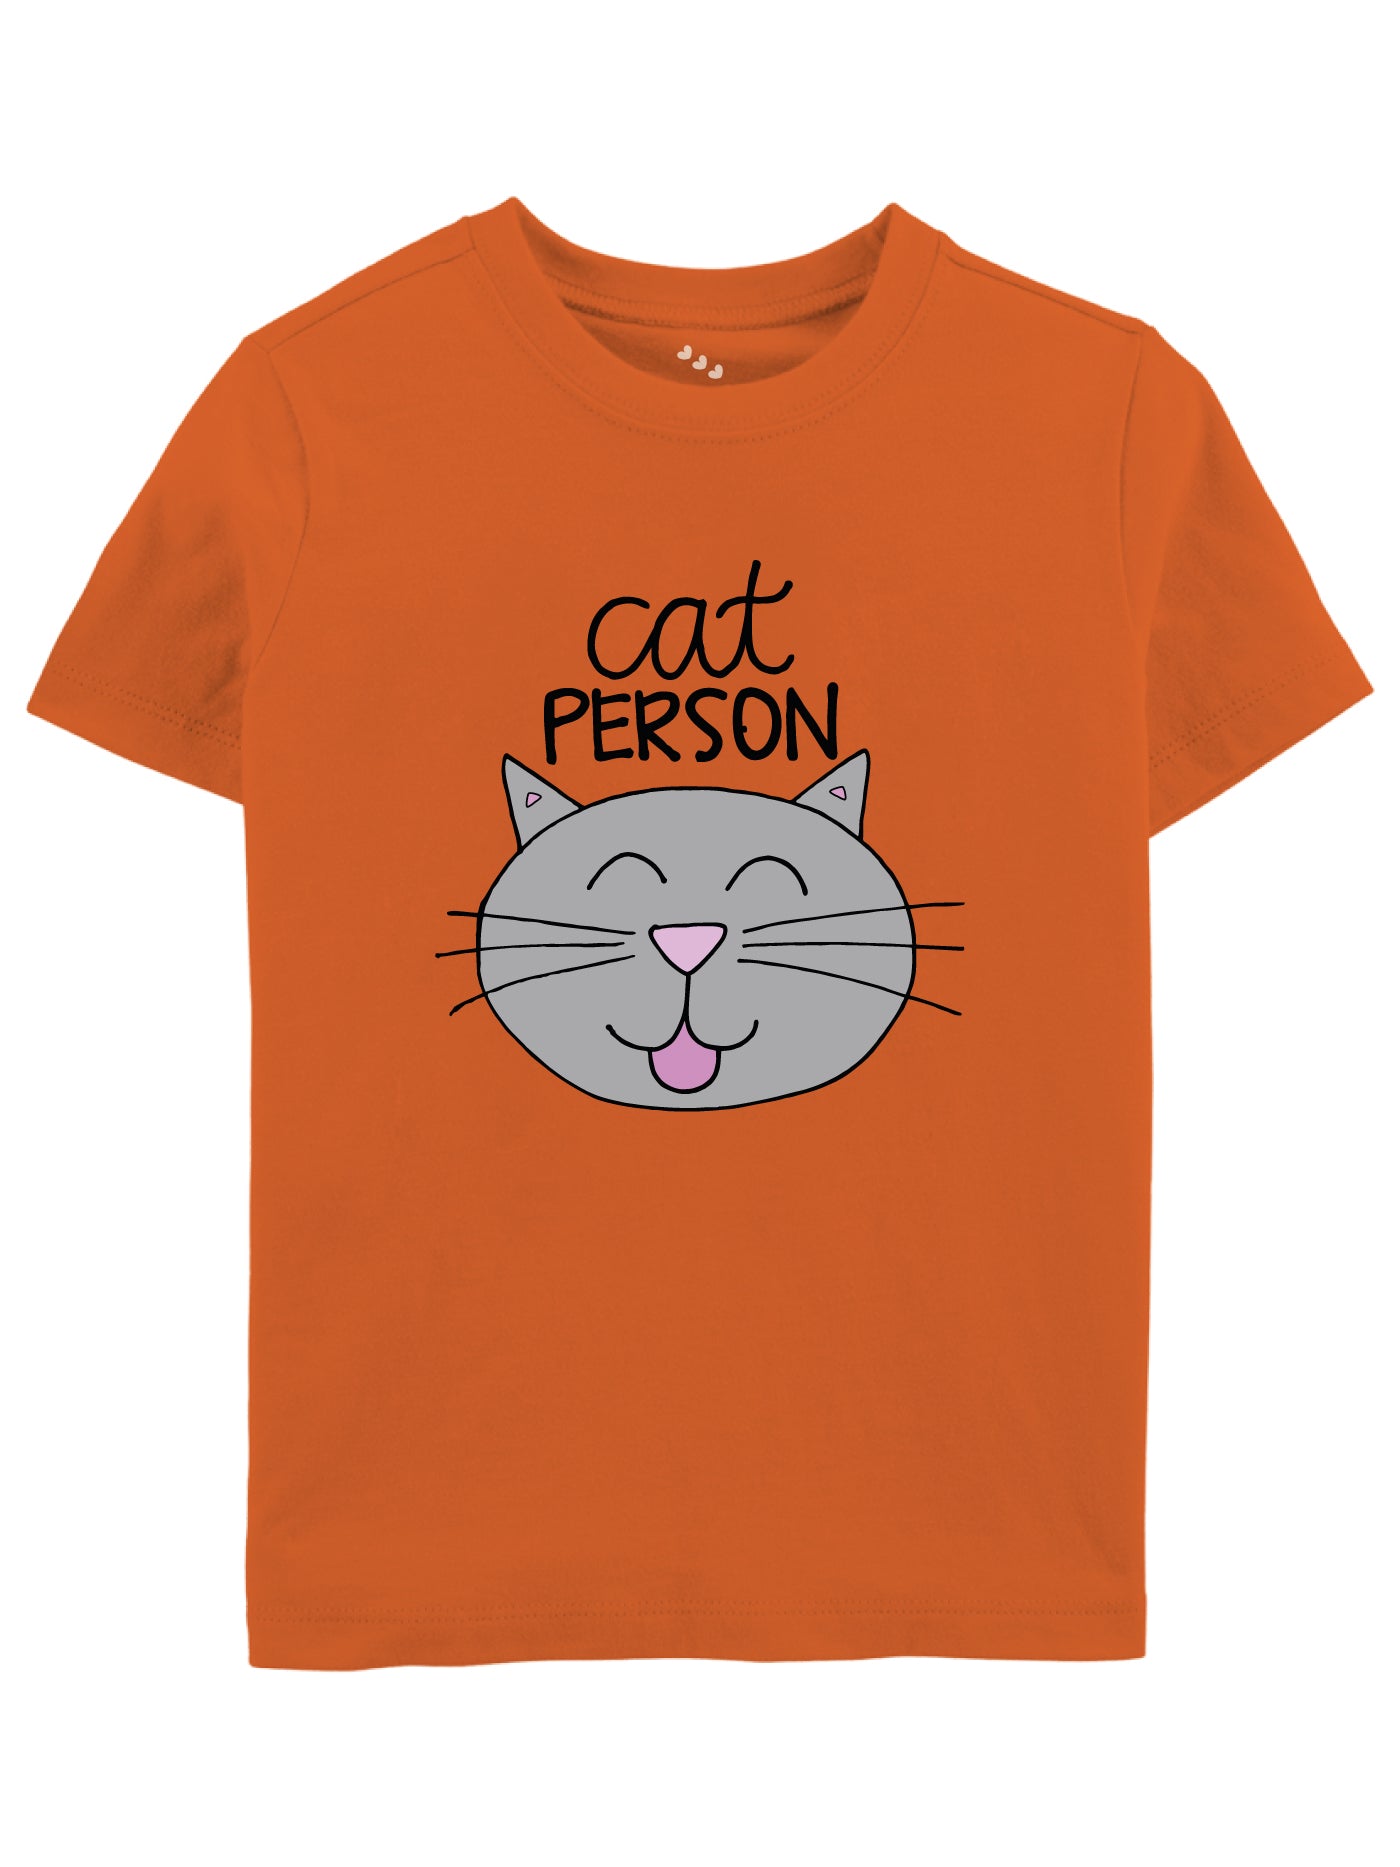 Cat Person - Tee